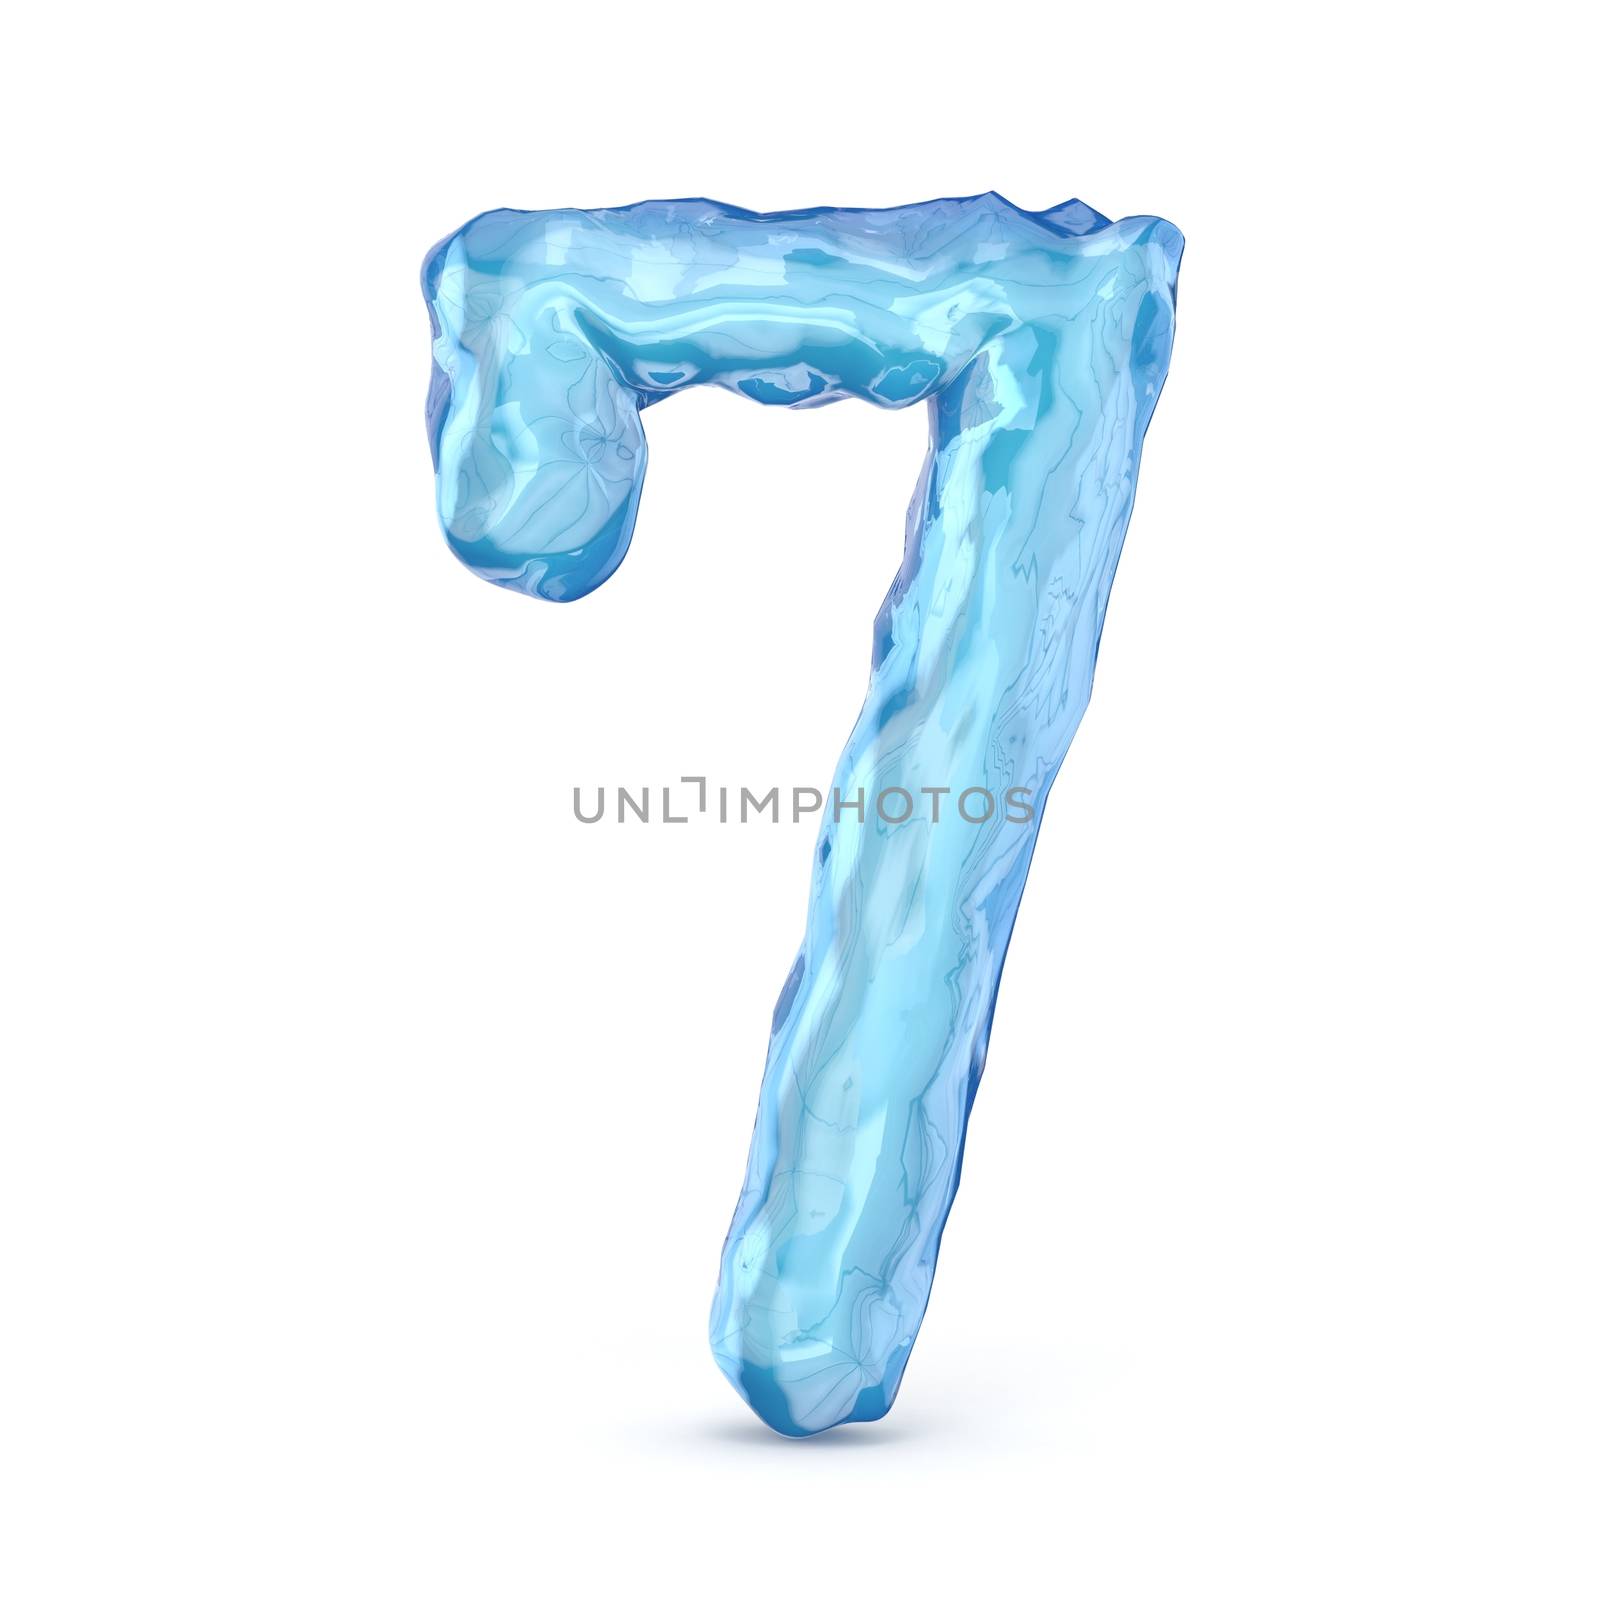 Ice font number 7 SEVEN 3D render illustration isolated on white background